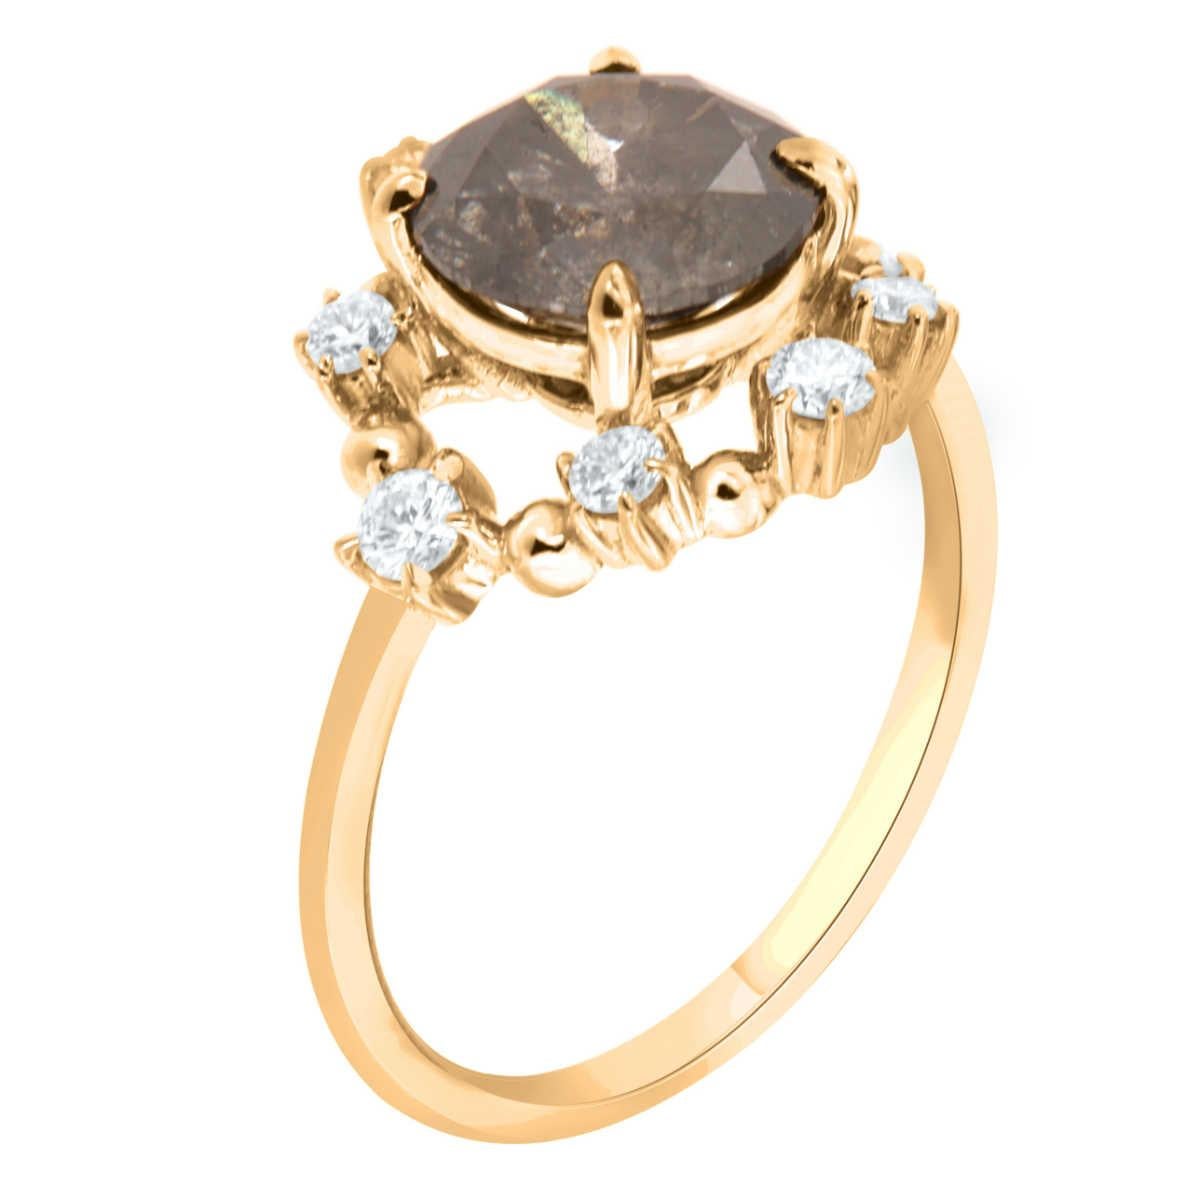 This 14k yellow gold delicate rustic ring features a 2.16 Carat Round shape Salt & Pepper Natural Diamond encircled by a halo of eight (8) brilliant round diamonds on top of a 1.4 MM wide band. 
The total diamond weight on the ring is 0.29-Carat.